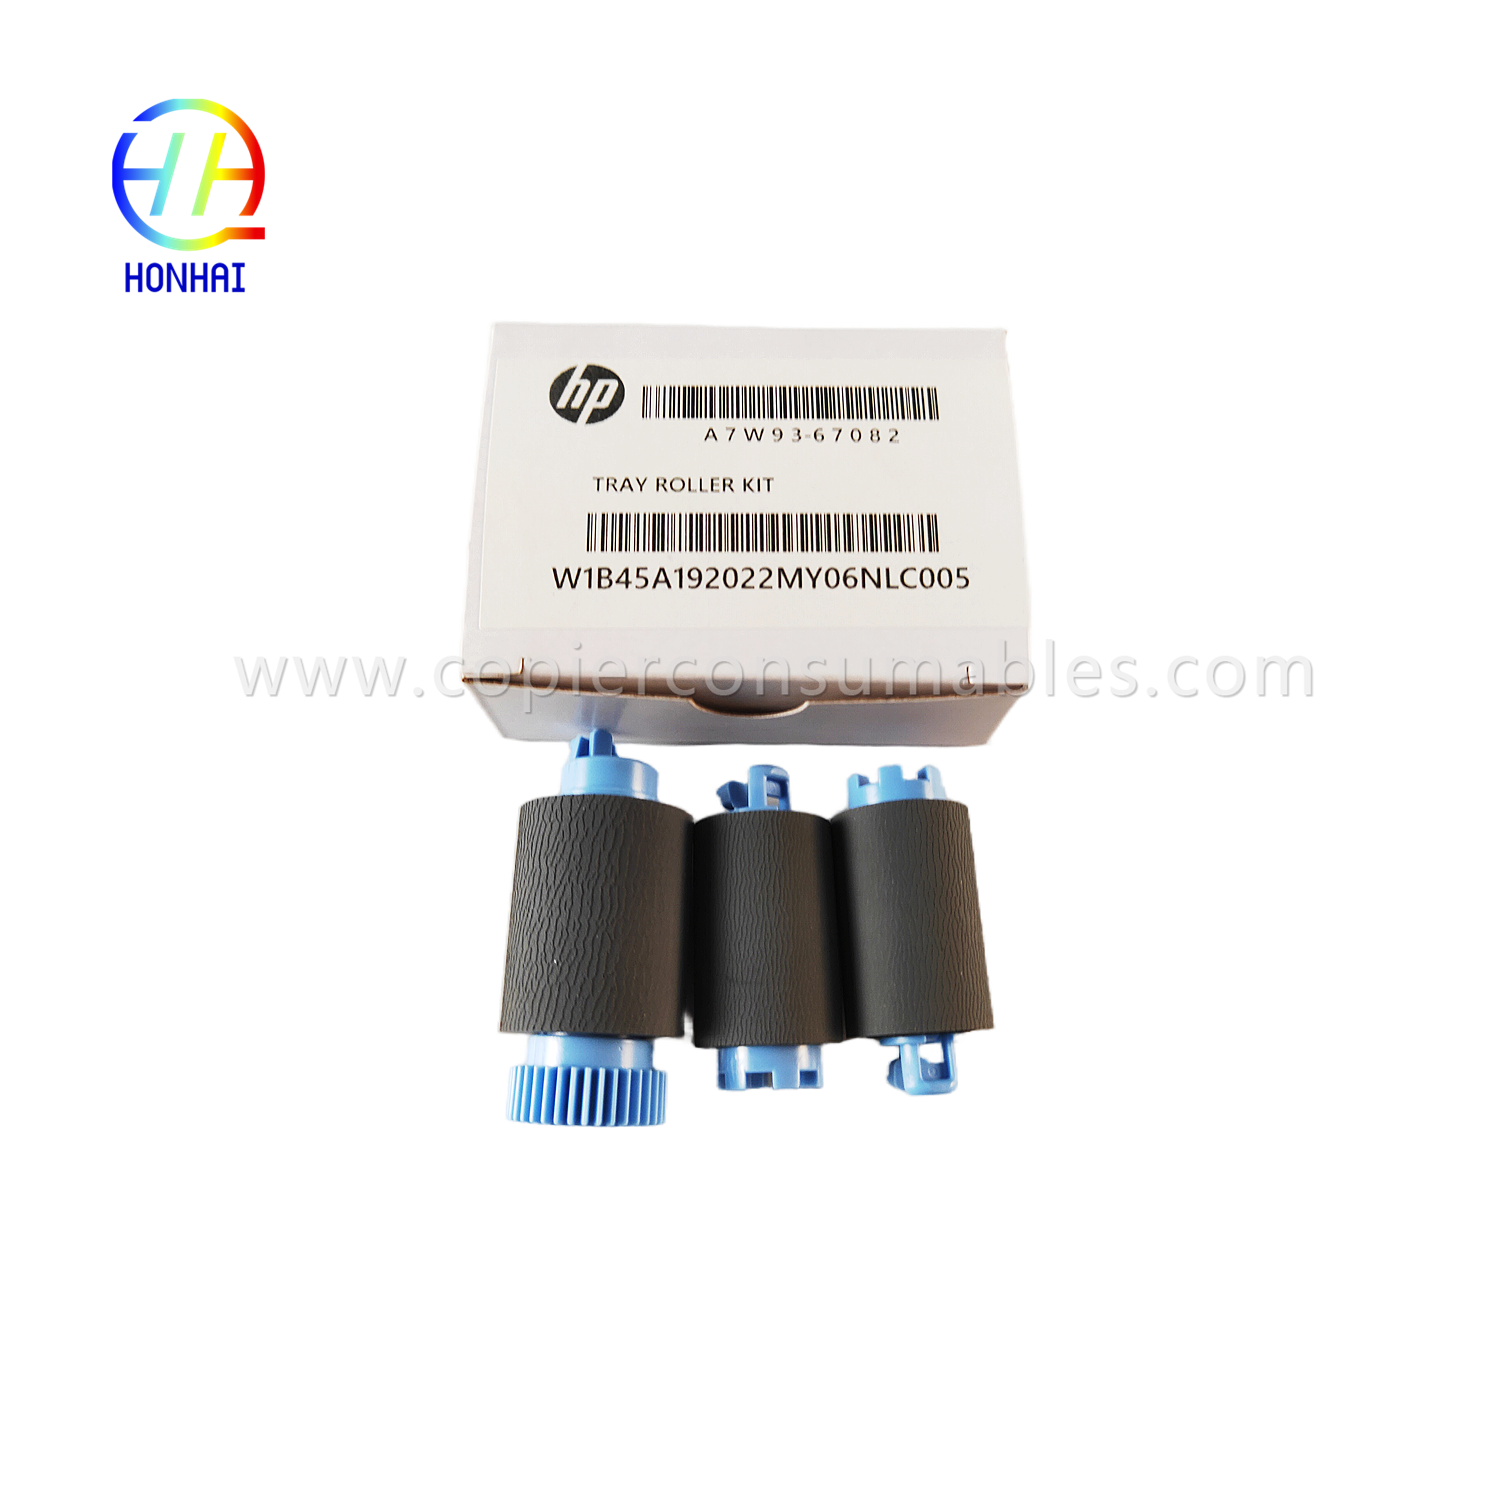 https://www.copierconsumables.com/tray-2-5-pickup-feed-separation-roller-set-for-hp-a7w93-67082-mfp-785f-780dn-e77650z-e77660z-e77650dn-e77650dn-e776774 p77750z-p77760z-p75050dn-p75050dw-prodott/